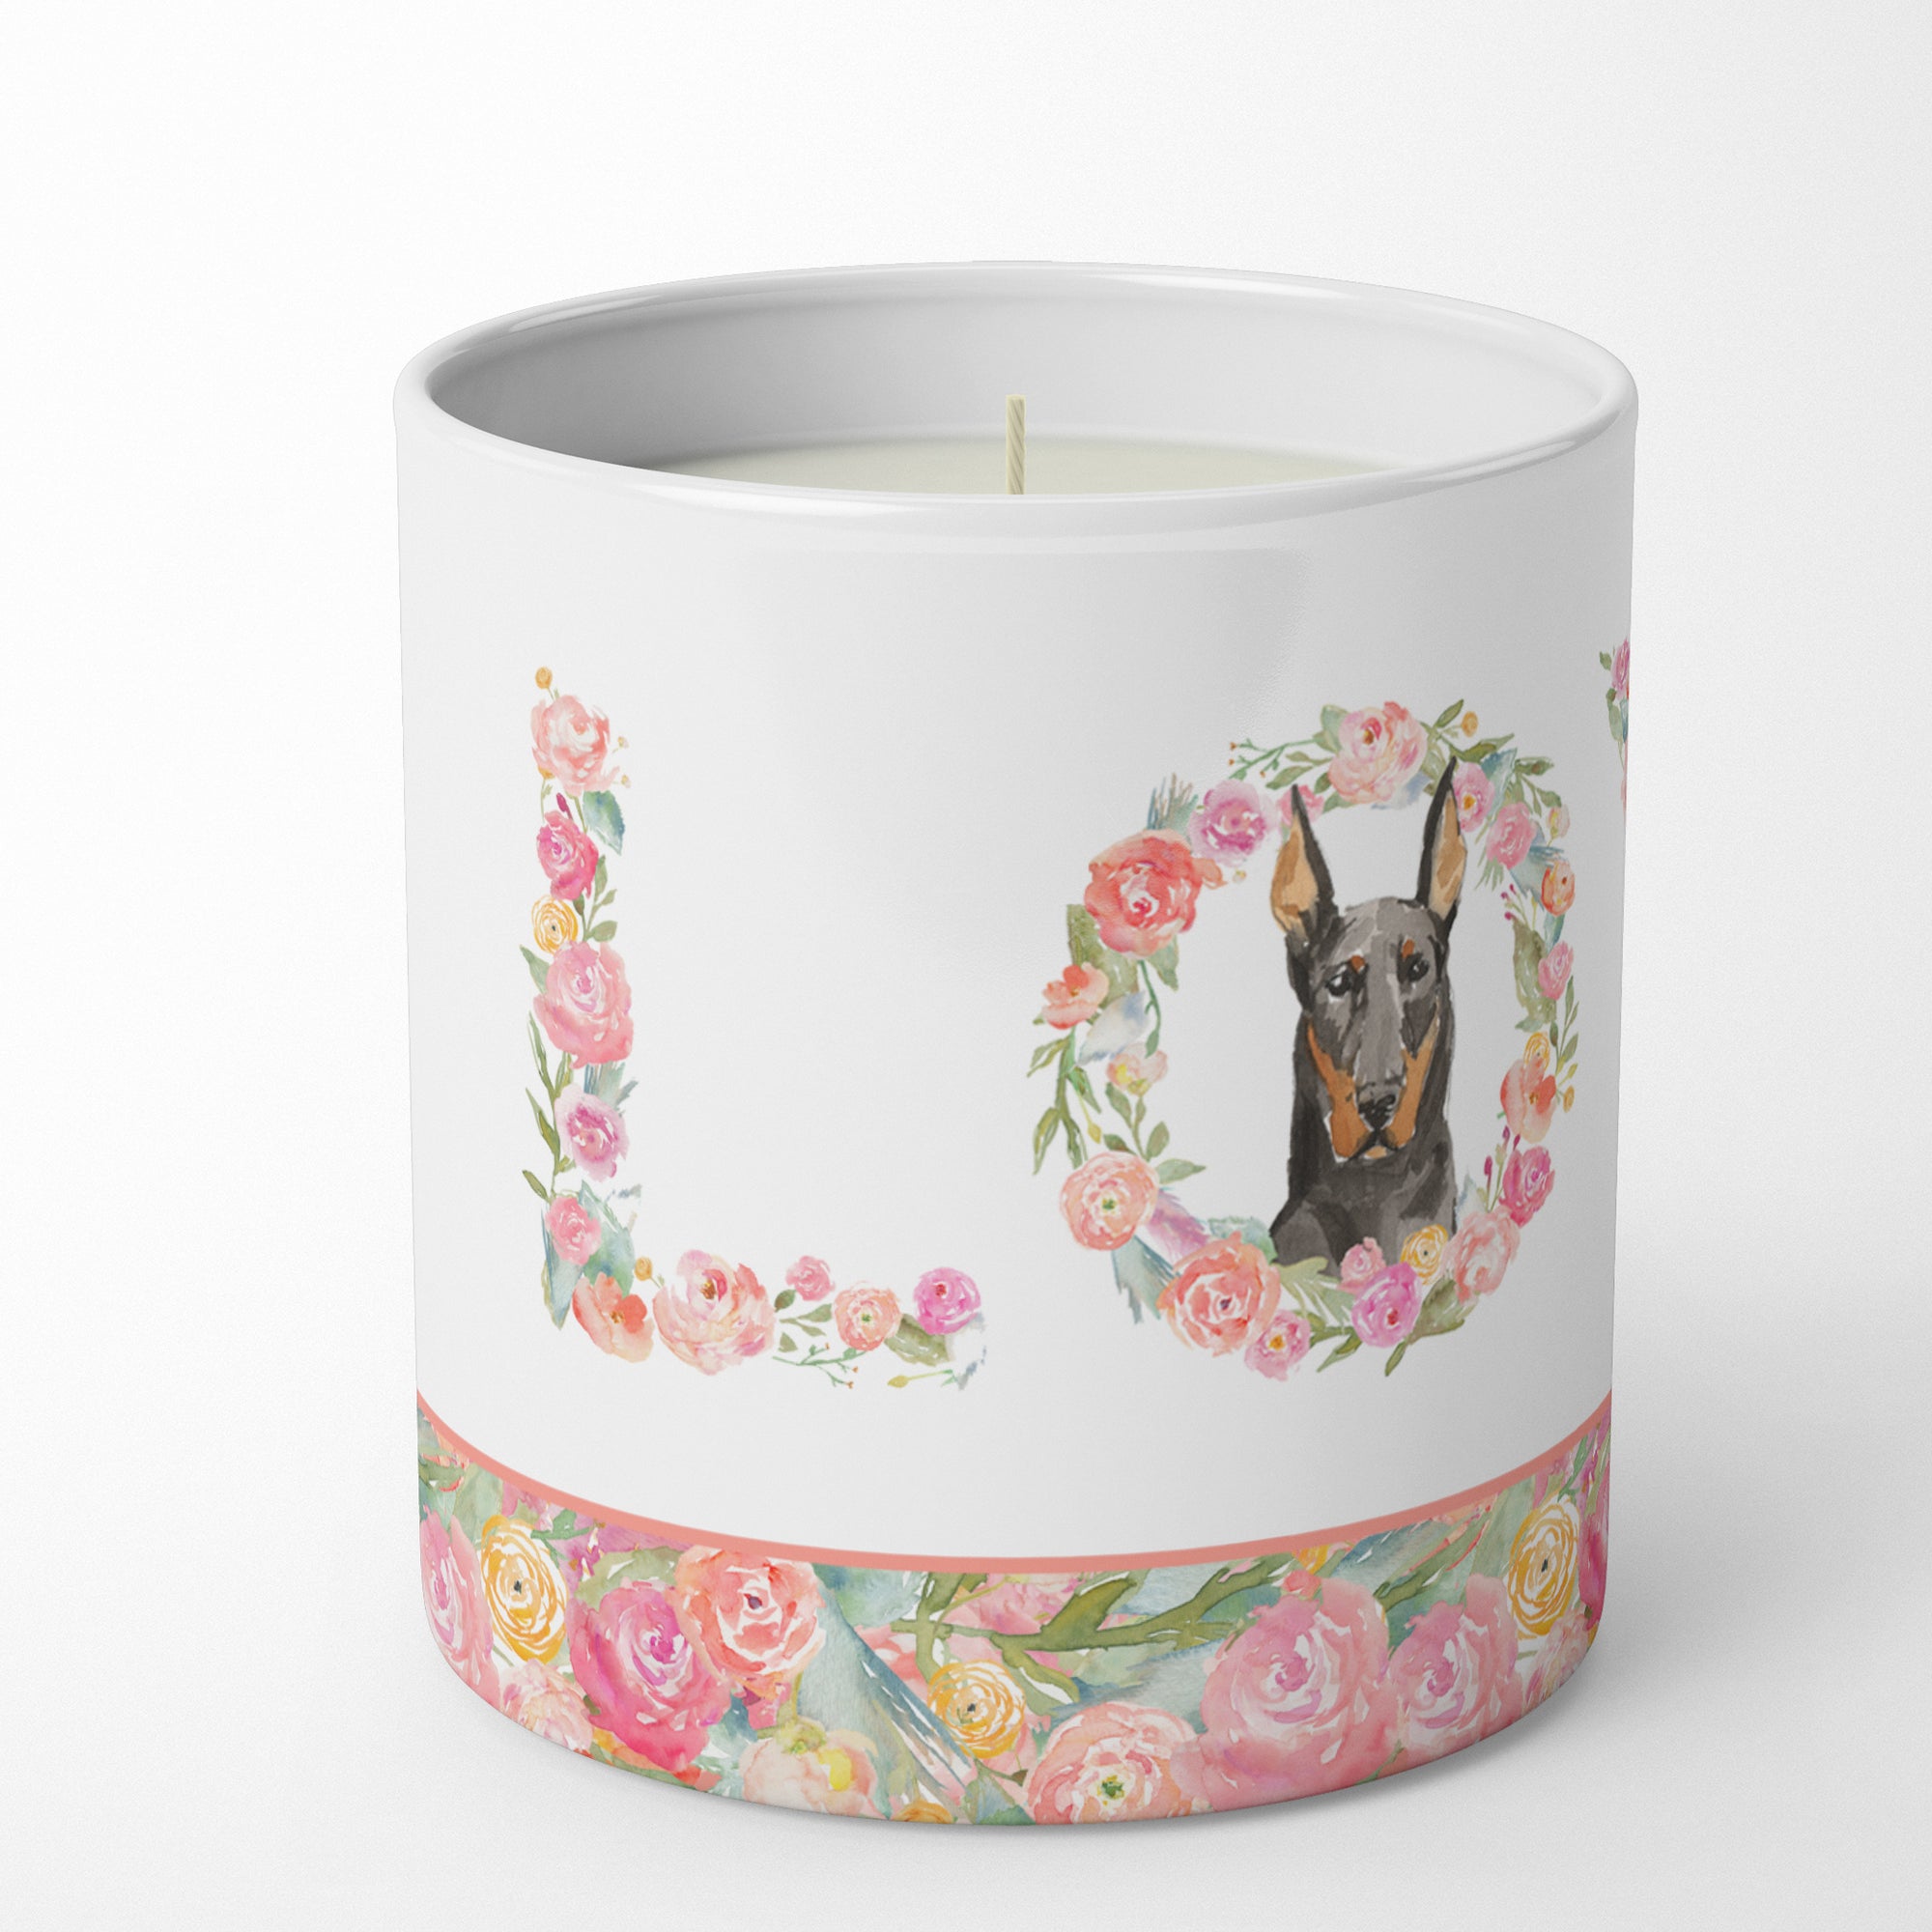 Buy this Doberman Pinscher Love 10 oz Decorative Soy Candle